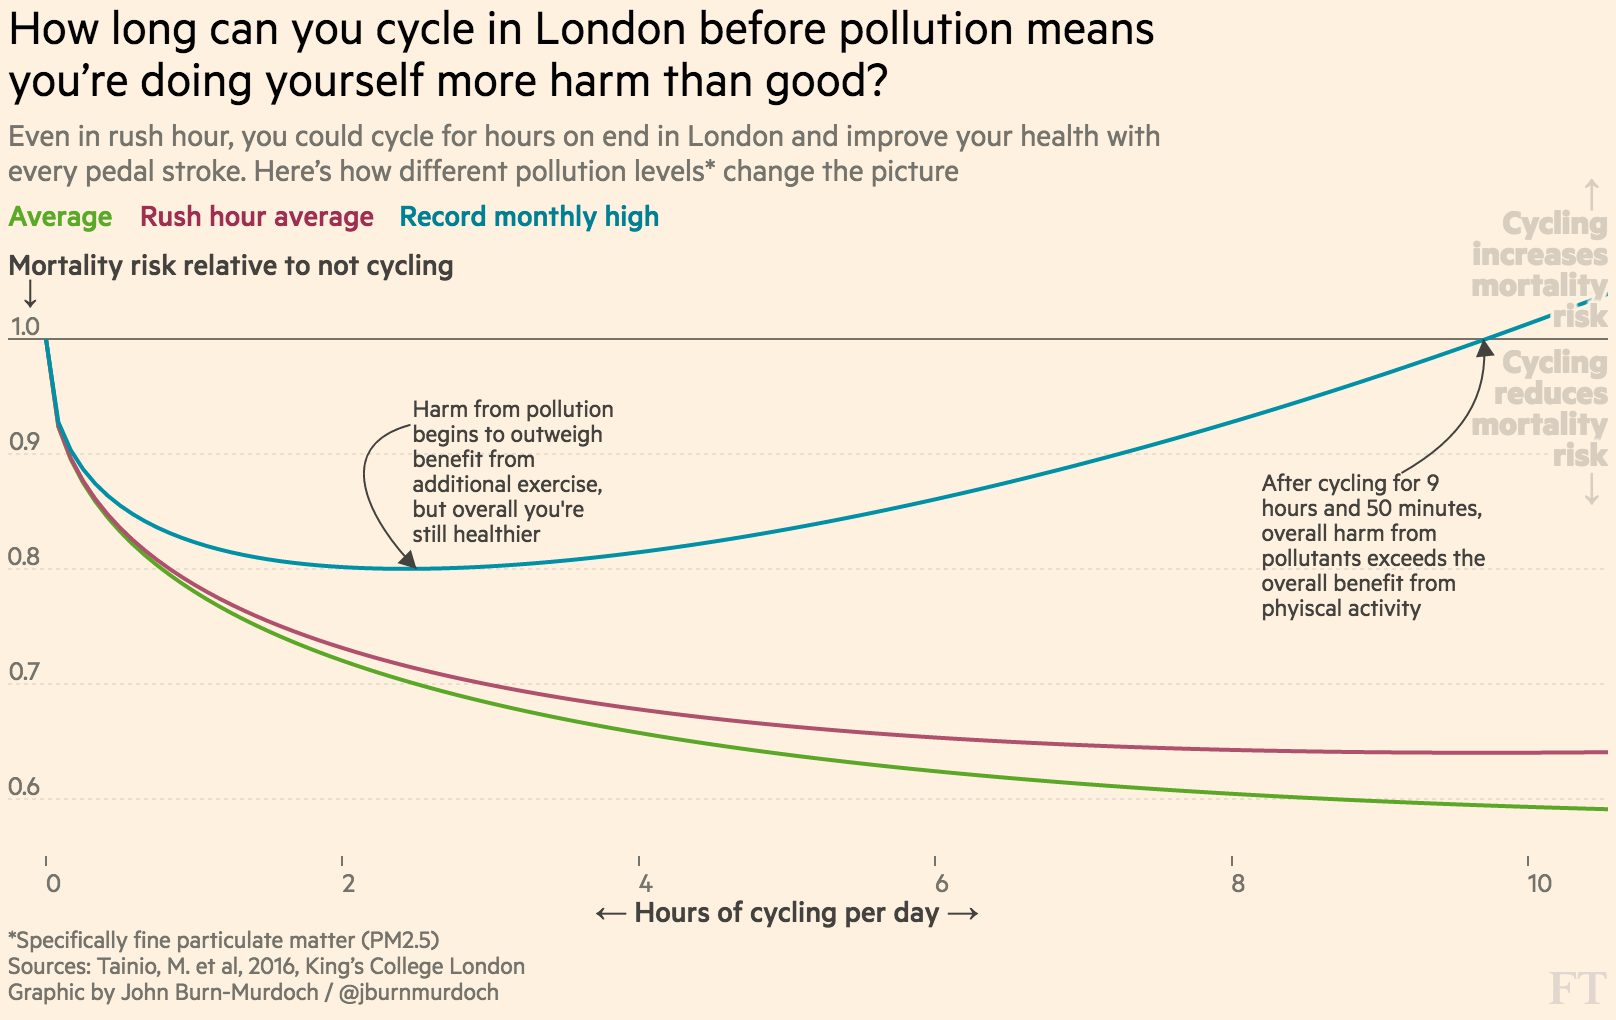 //ig.ft.com/sites/urban-cycling/assets/pollution-london-large.png)